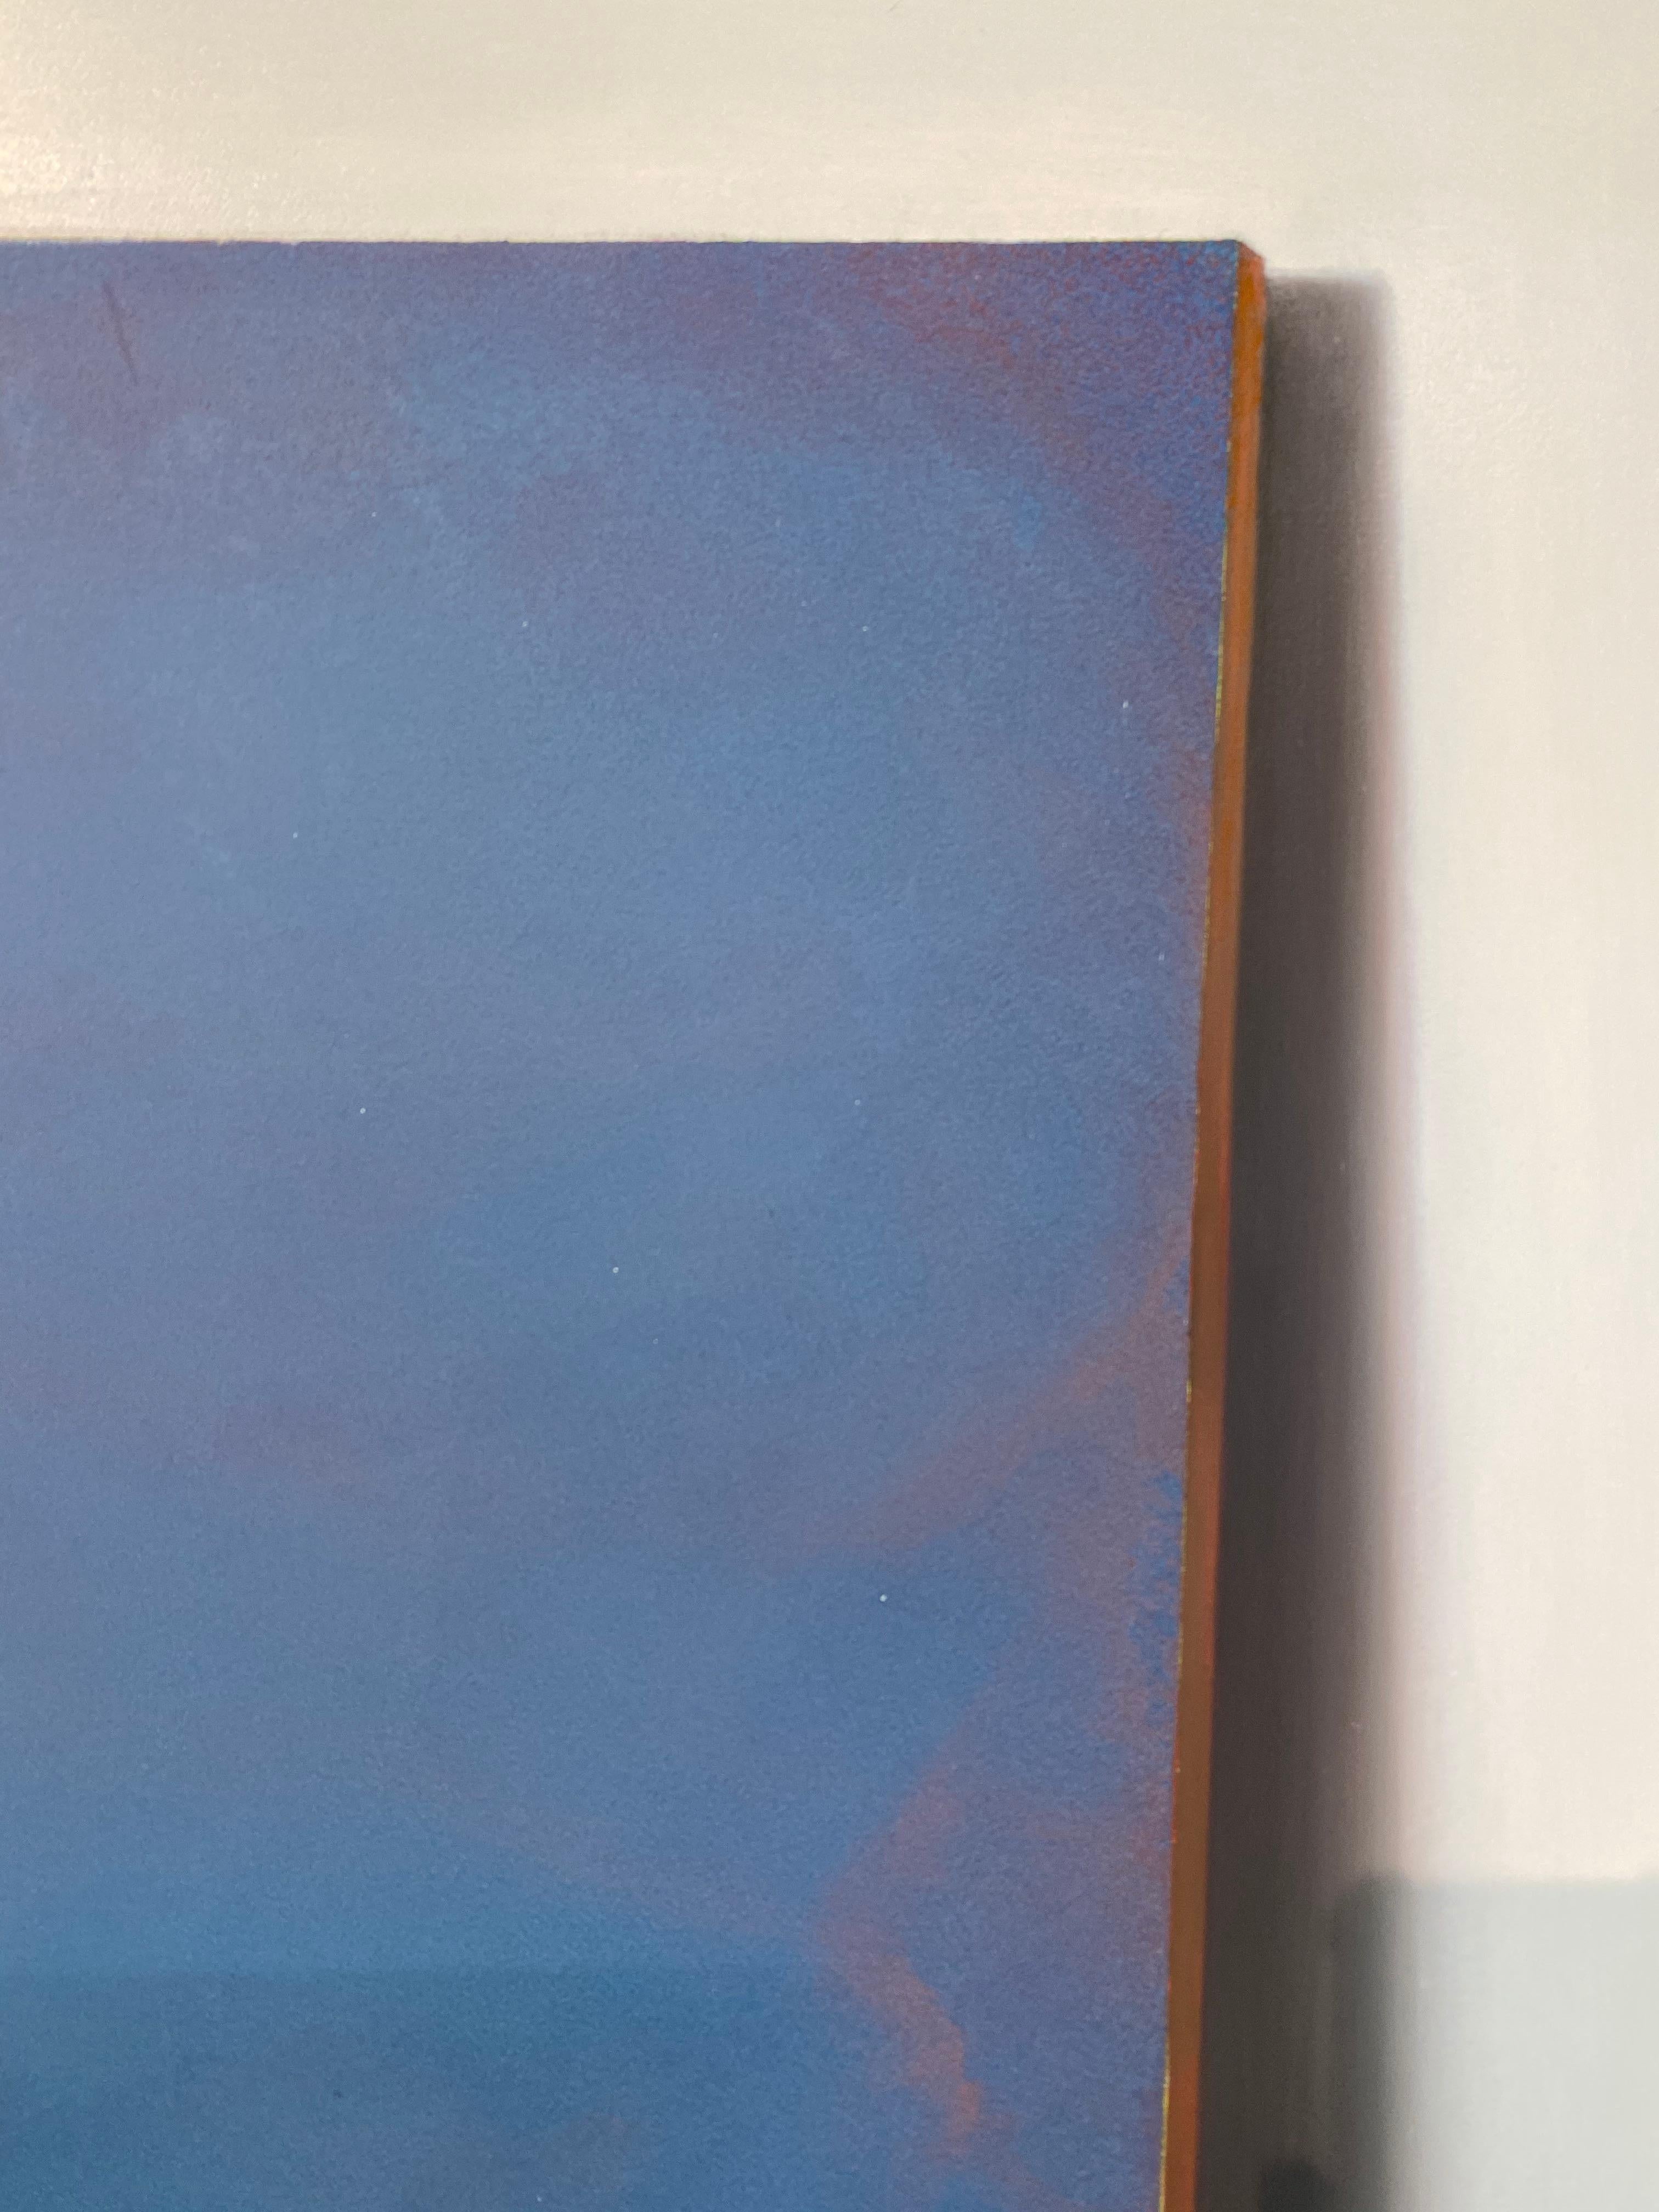 This unique piece of an abstract blue painting leaning against the wall is made by German artist realist painter Bart Koning in a cooperation with his colleague abstract painter Lydia Mammes. 

When we saw this work for the first time  we were